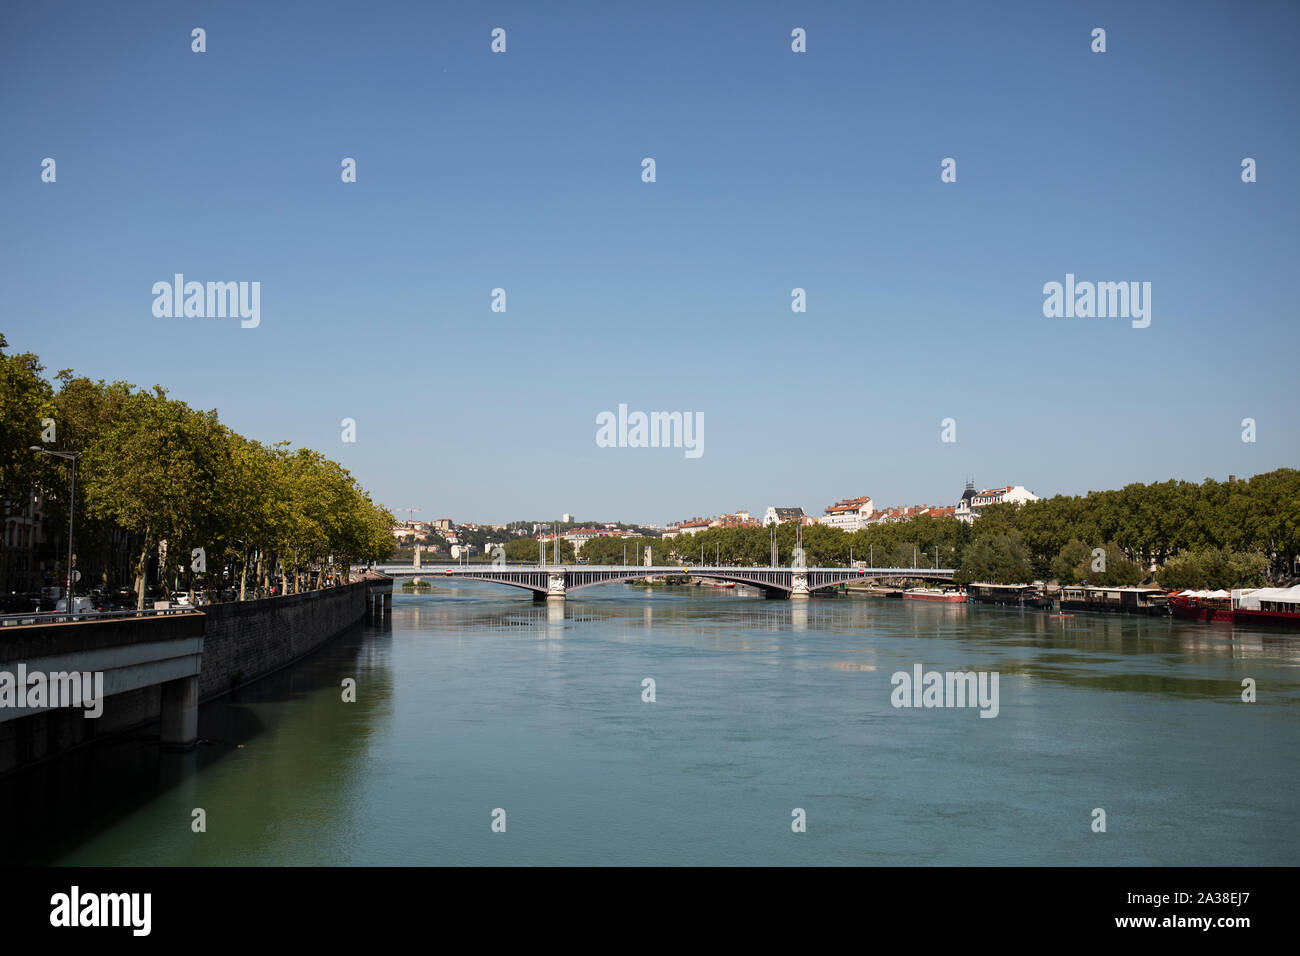 The Pont Lafayette over the Loire River in Lyon, France. Stock Photo